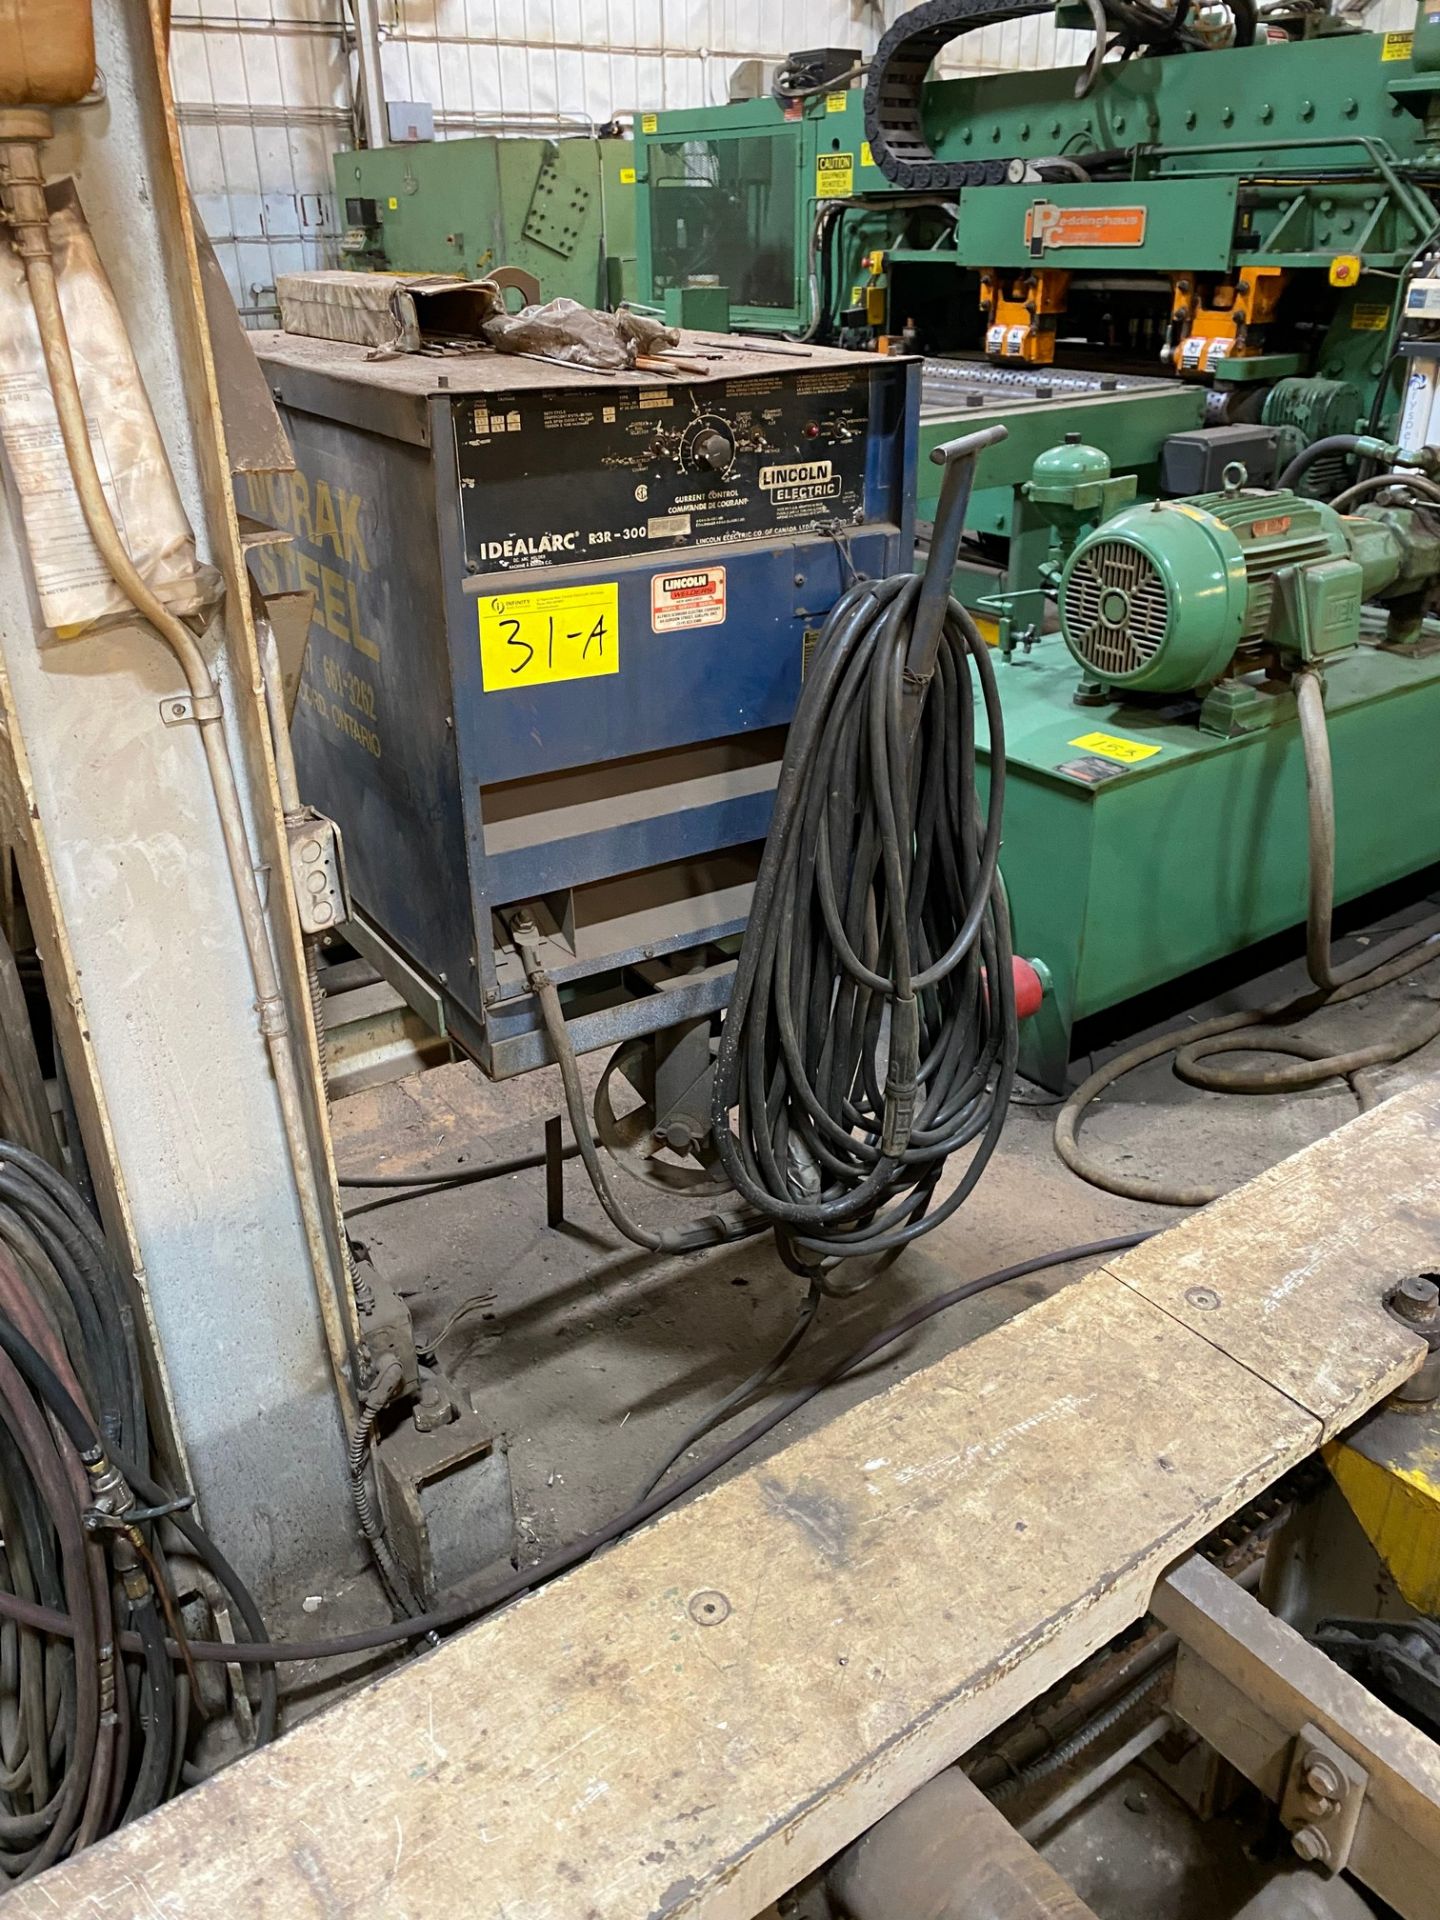 LINCOLN ELECTRIC IDEALARC R3R-300 WELDER W/ CABLES AND CART